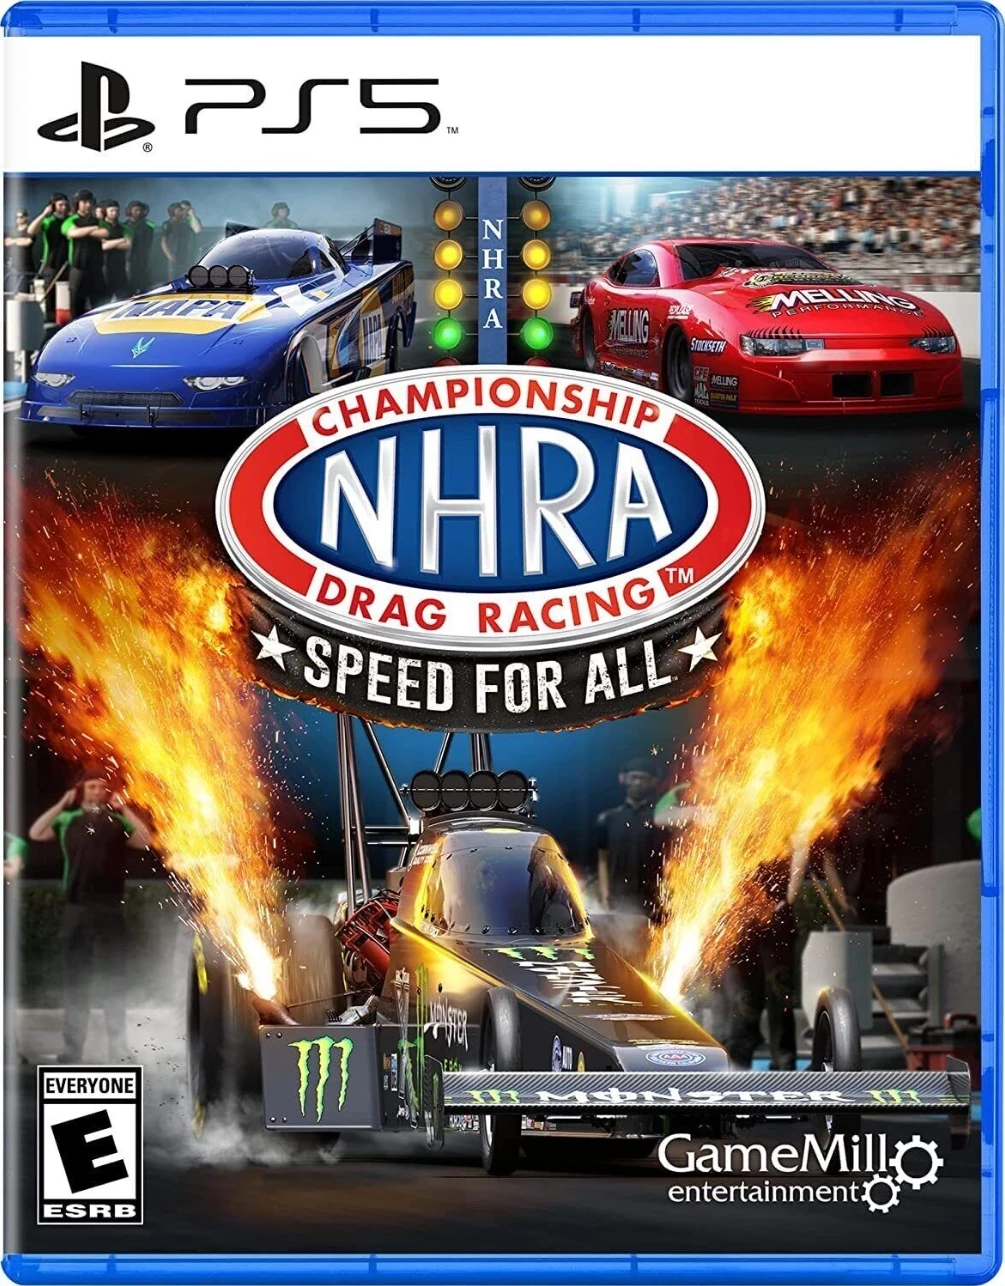 NHRA Championship Drag Racing: Speed For All (USA Import) (PS5), GameMill Entertainment